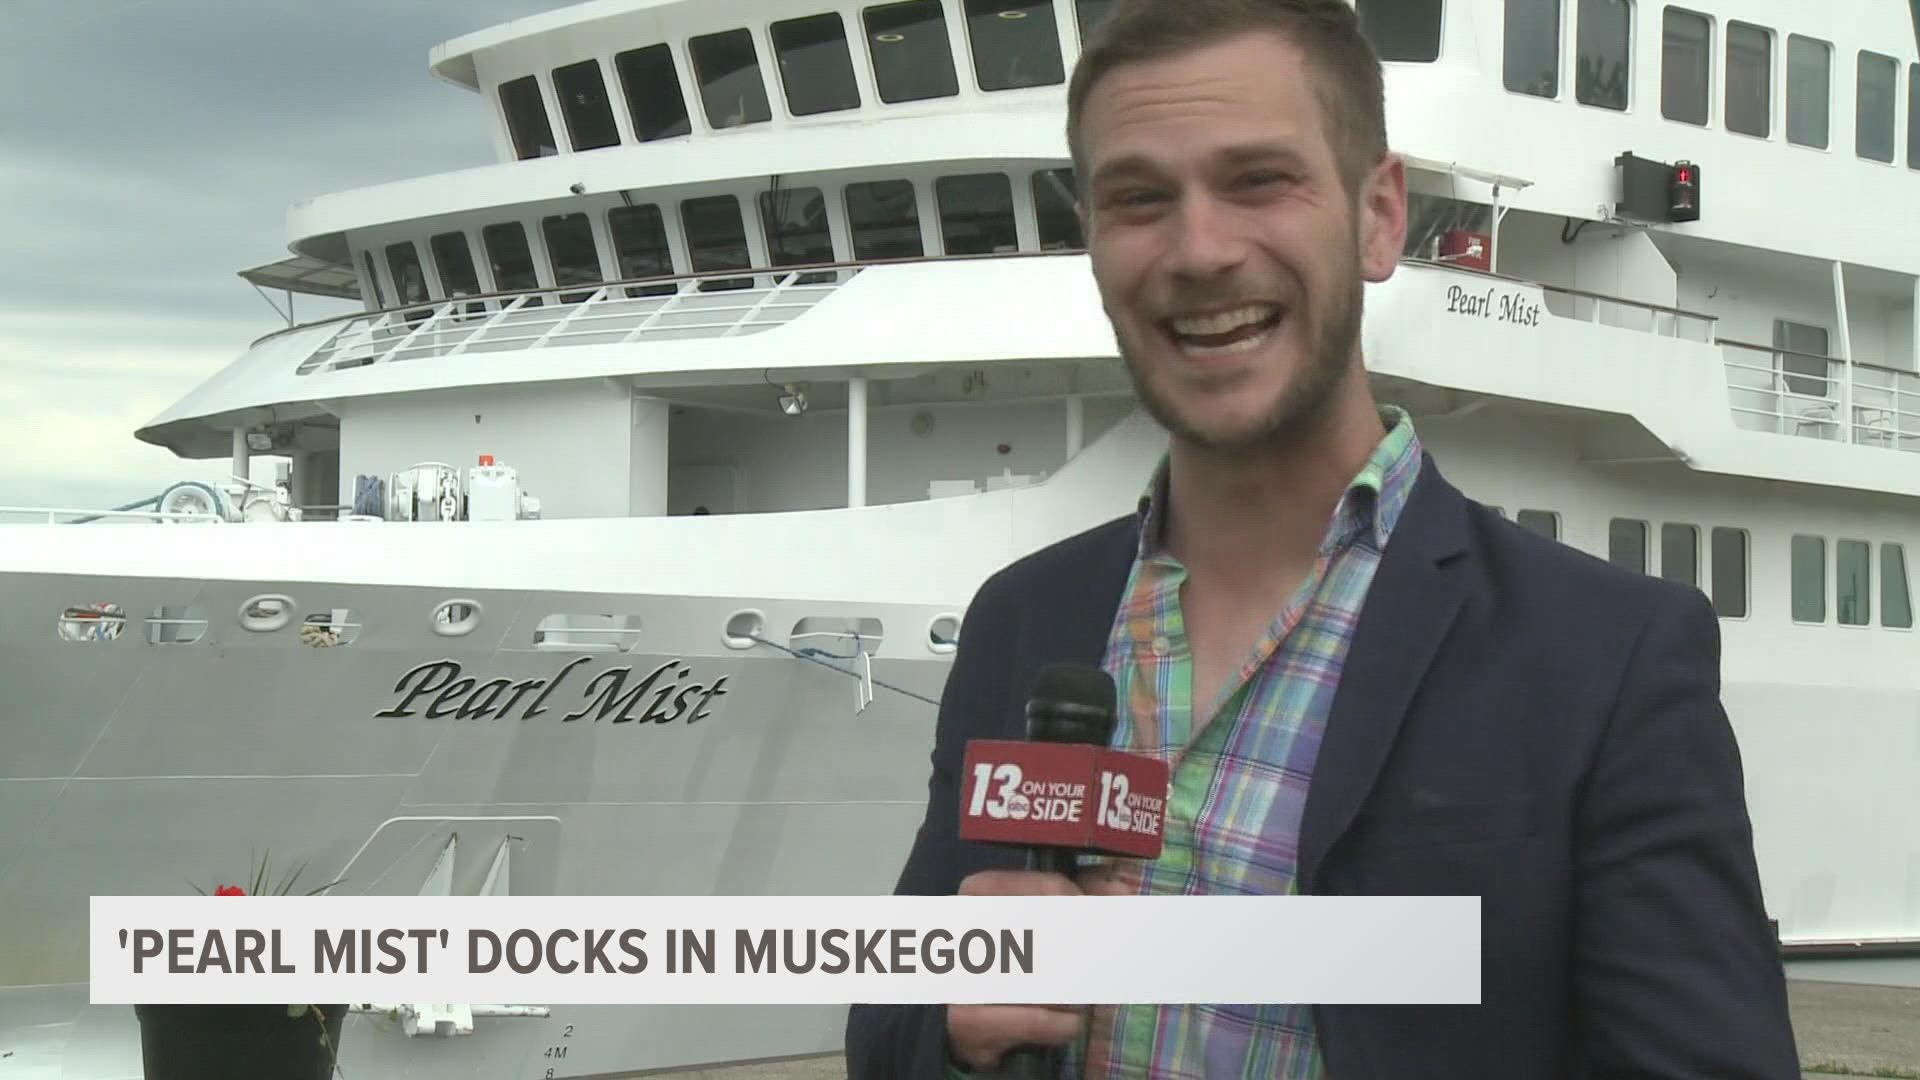 The Pearl Mist has docked in Muskegon, and is ready for onlookers to experience real luxury on the available tour.